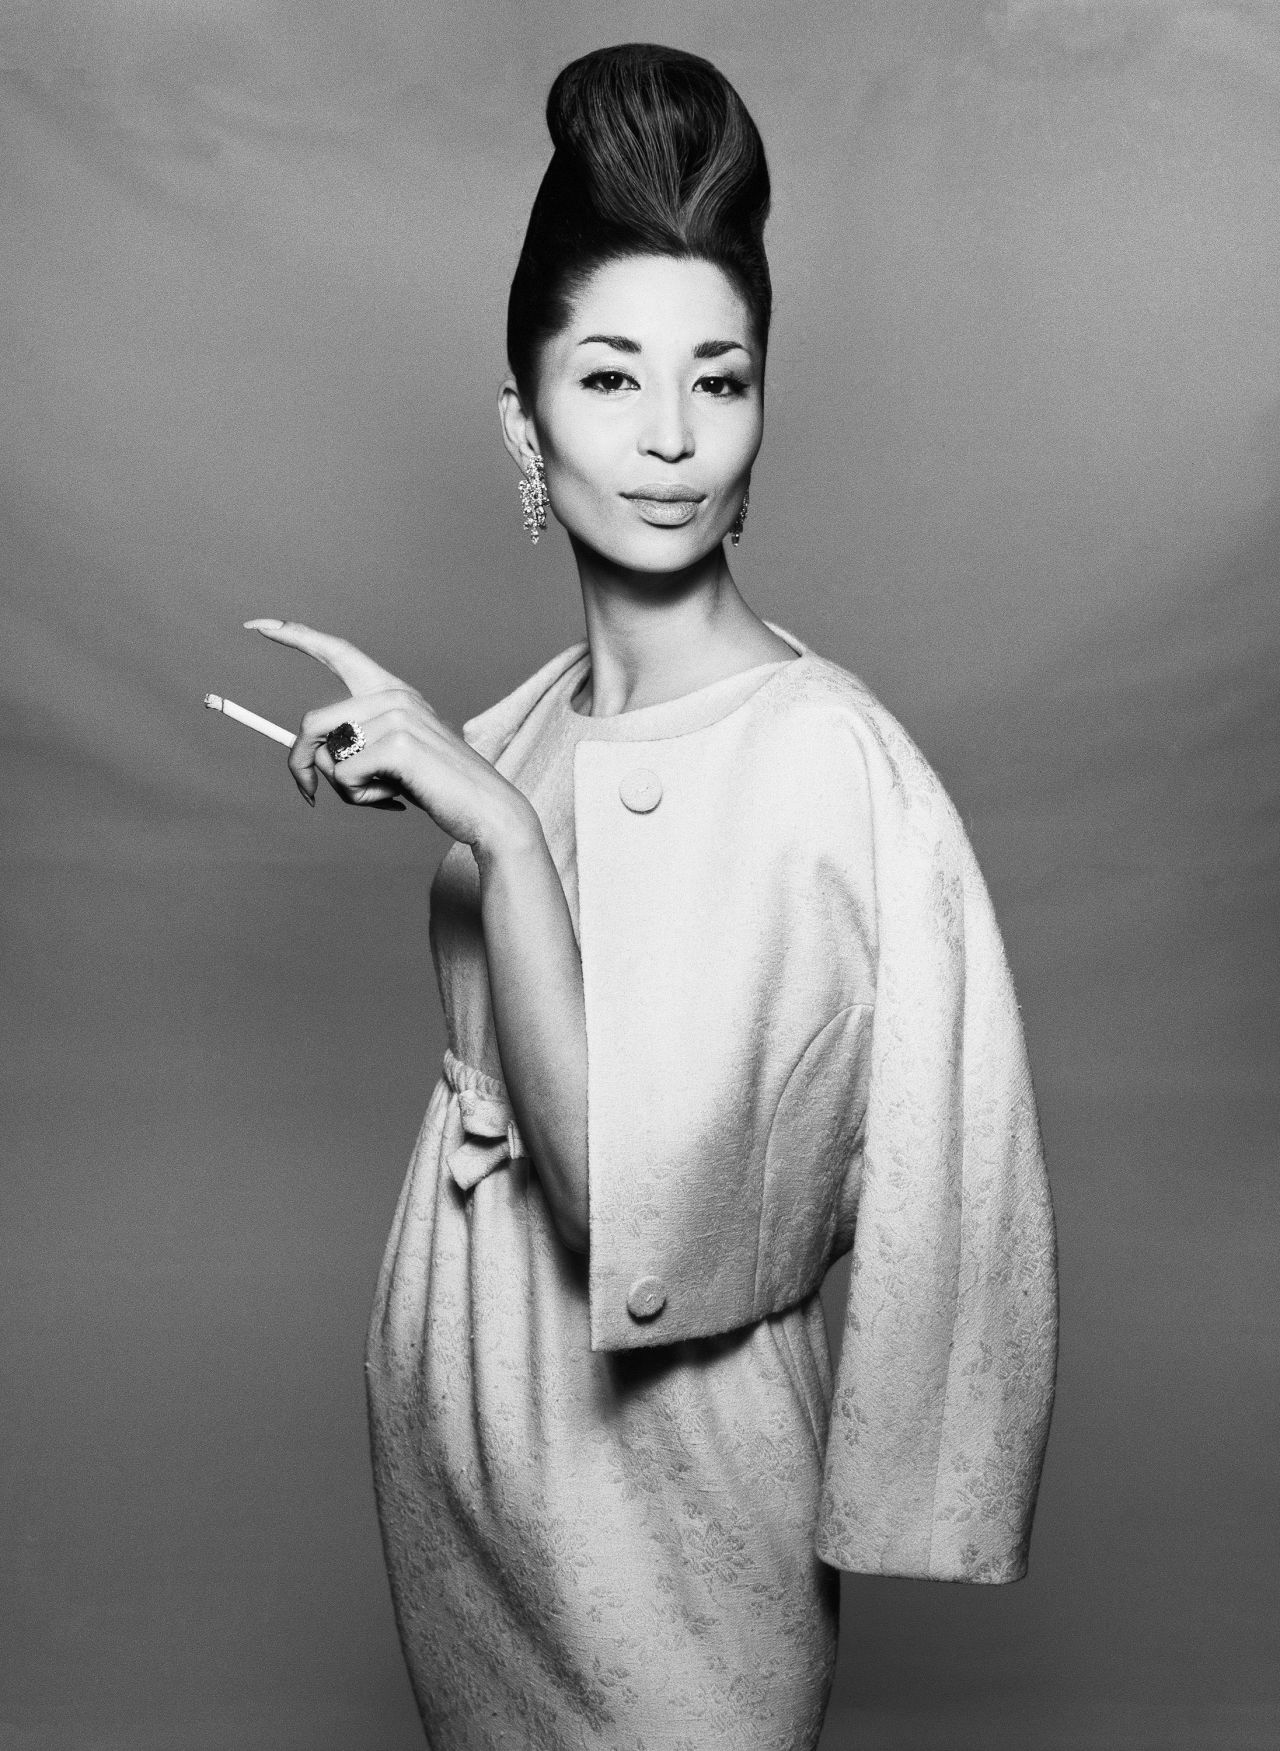 Filmmaker Sofia Coppola chose this iconic 1958 photograph of model China Machado. "As a kid, seeing Richard Avedon's images made me dream," Coppola said. "I especially loved his studio portraits of elegant women, like this one of China Machado, which is so full of personality and style. She was a remarkable woman and a pioneer of diversity in the upper echelons of fashion."